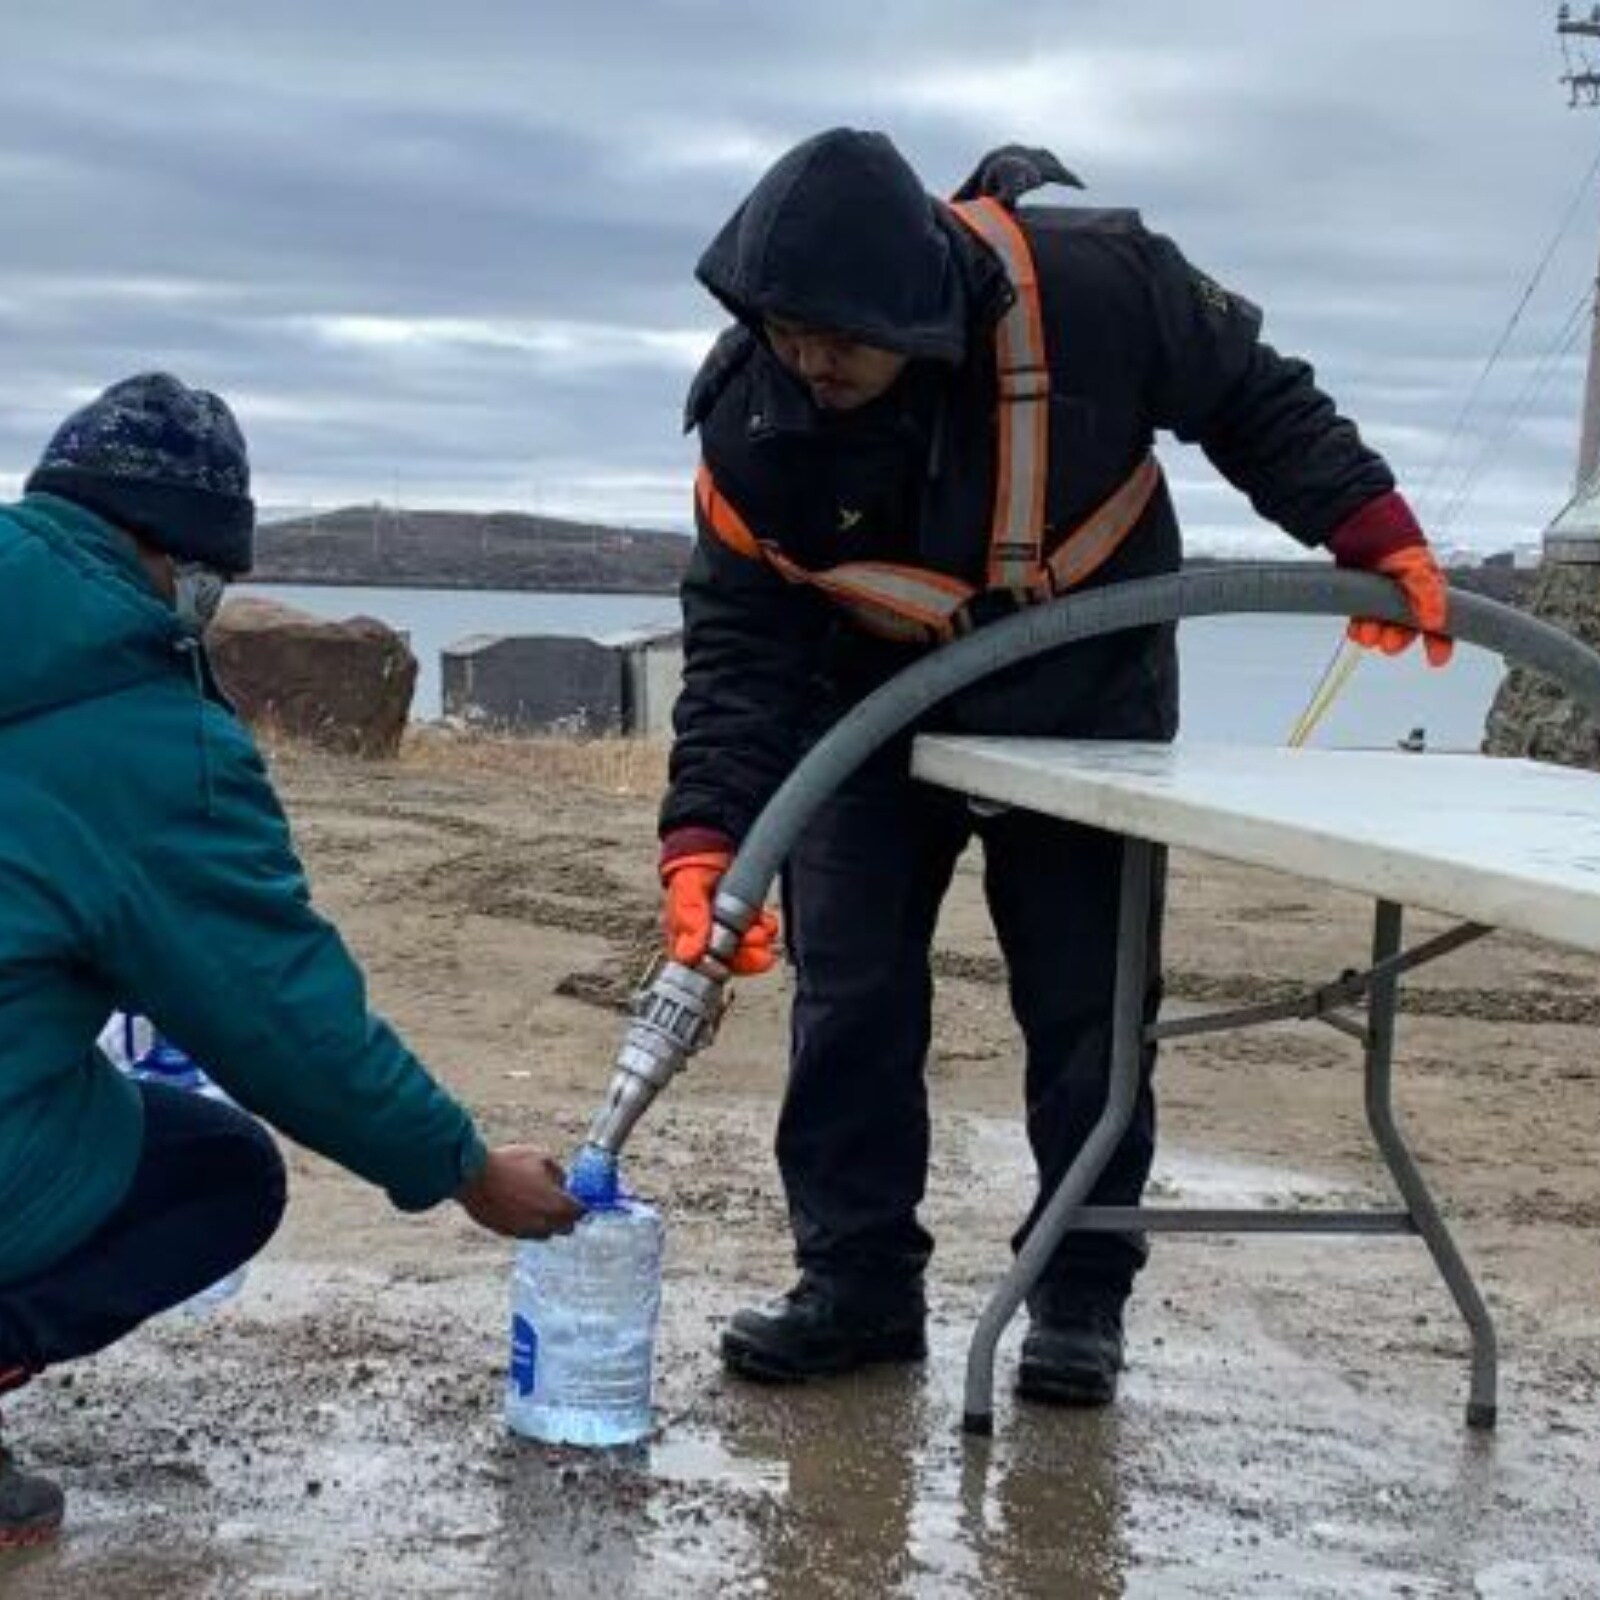 Canadian city of Iqaluit fuel had entered its water supply declared a state of emergency